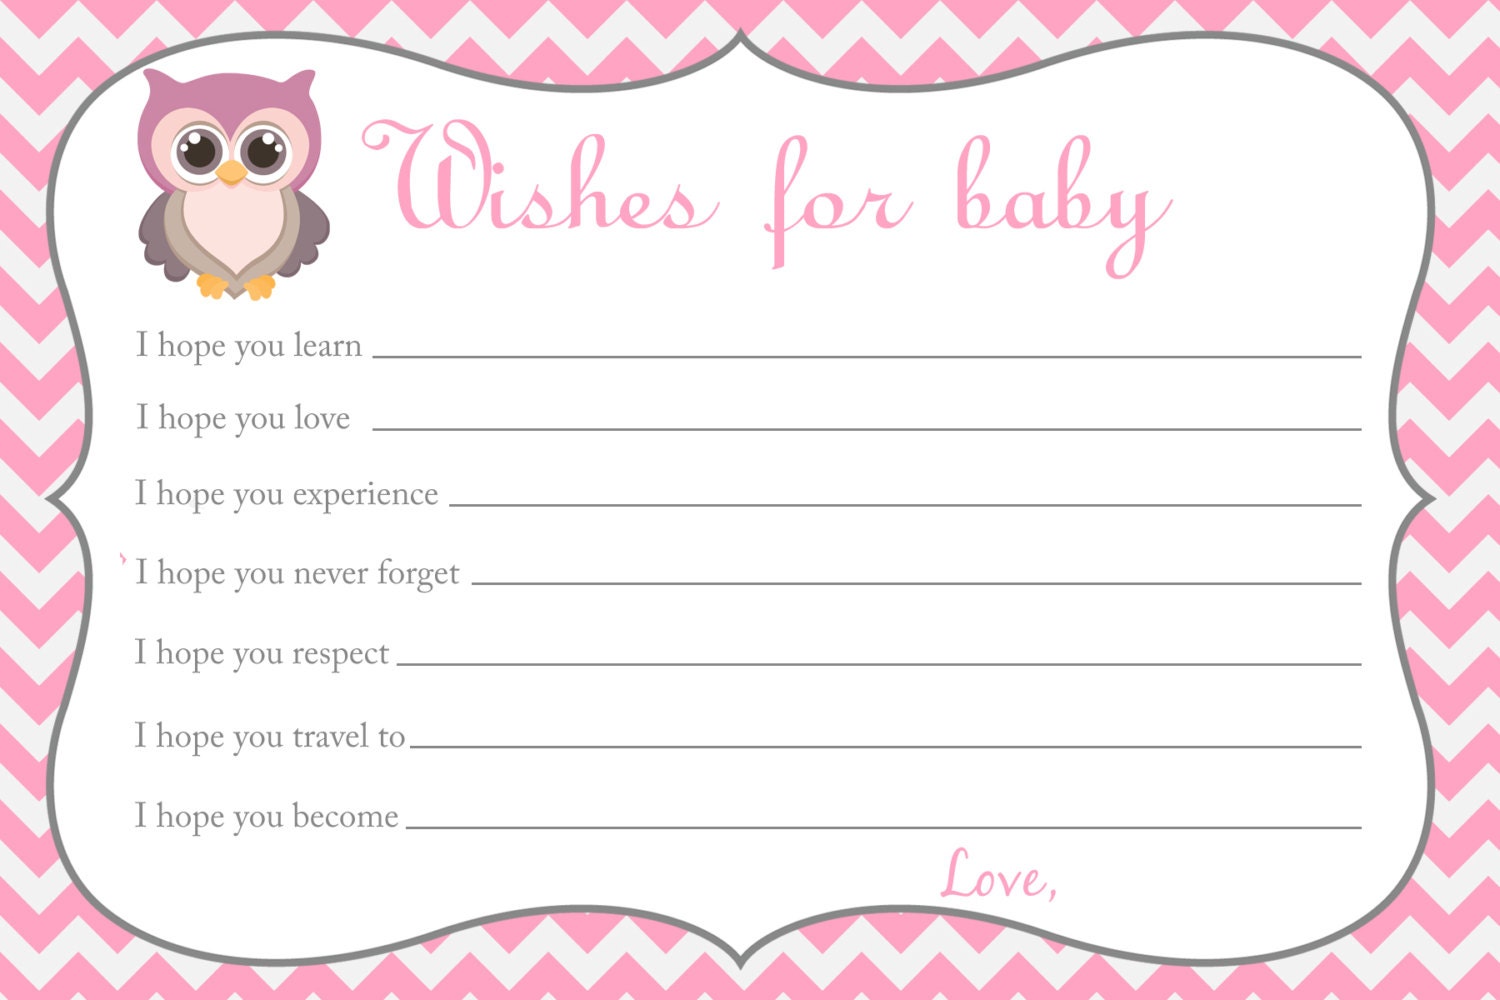 Printable Chevron Baby Shower Wishes for Baby